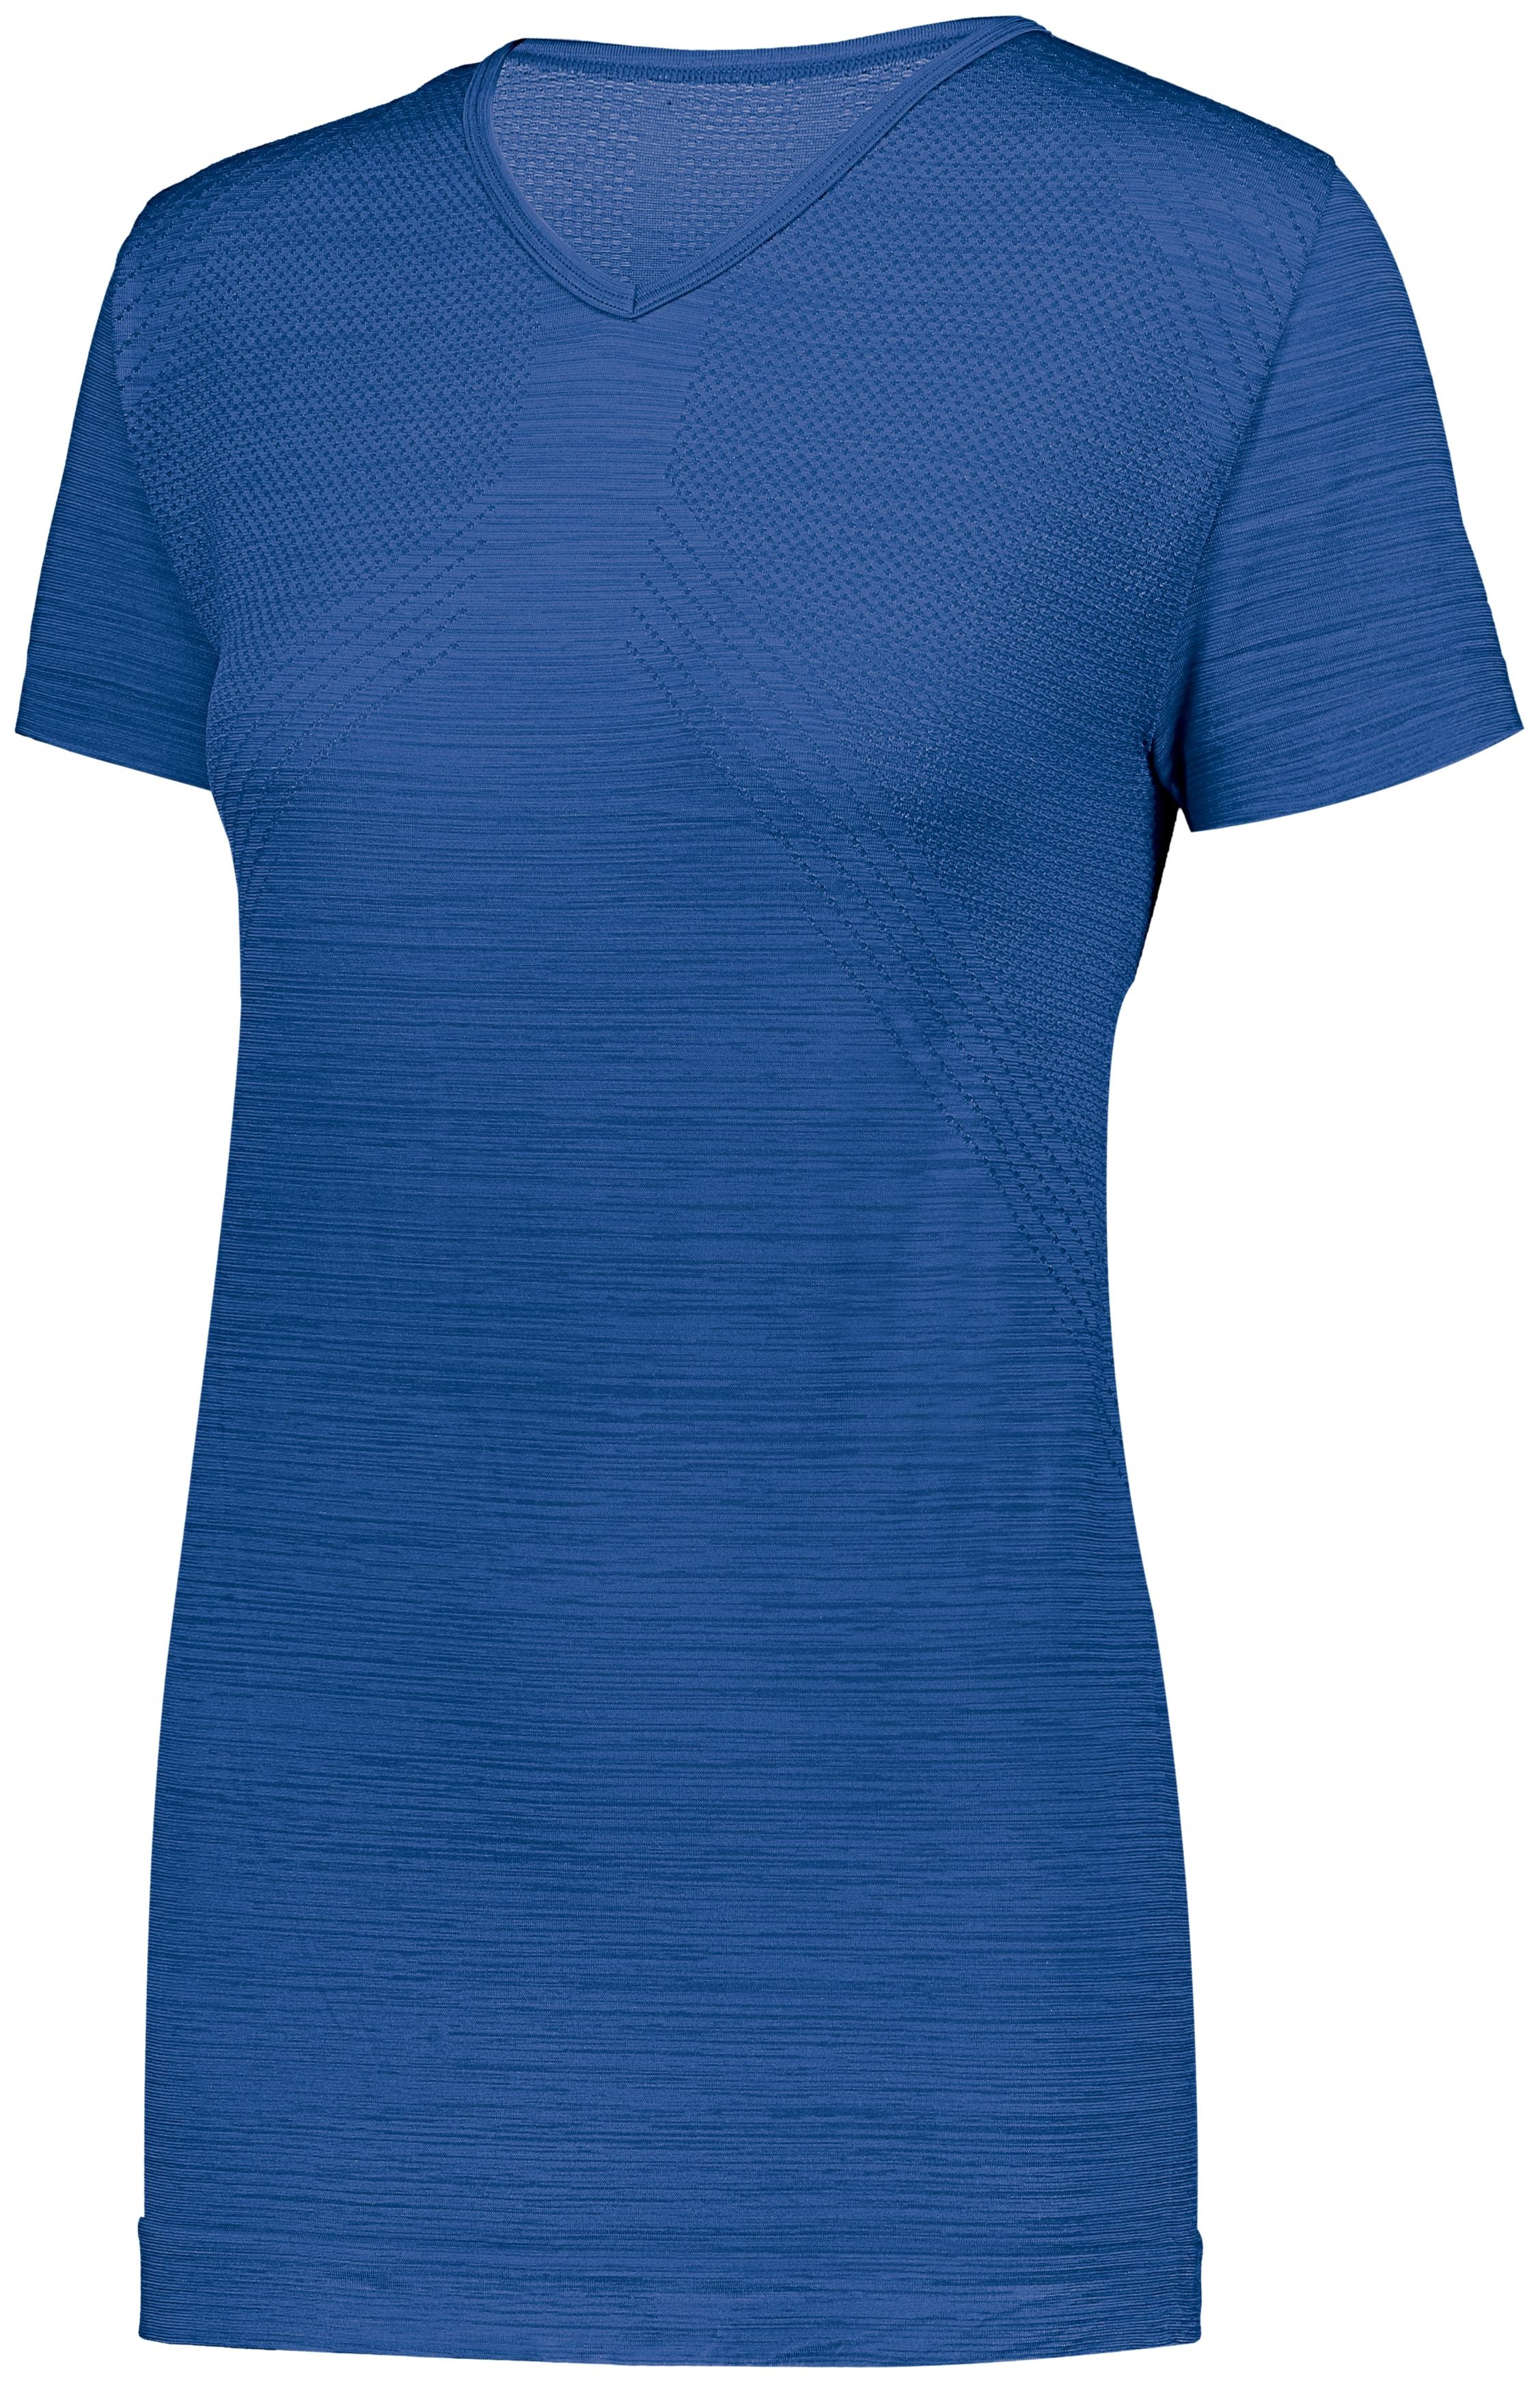 Holloway Ladies Striated Shirt Short Sleeve in Royal  -Part of the Ladies, Holloway, Shirts, Striated-Collection product lines at KanaleyCreations.com